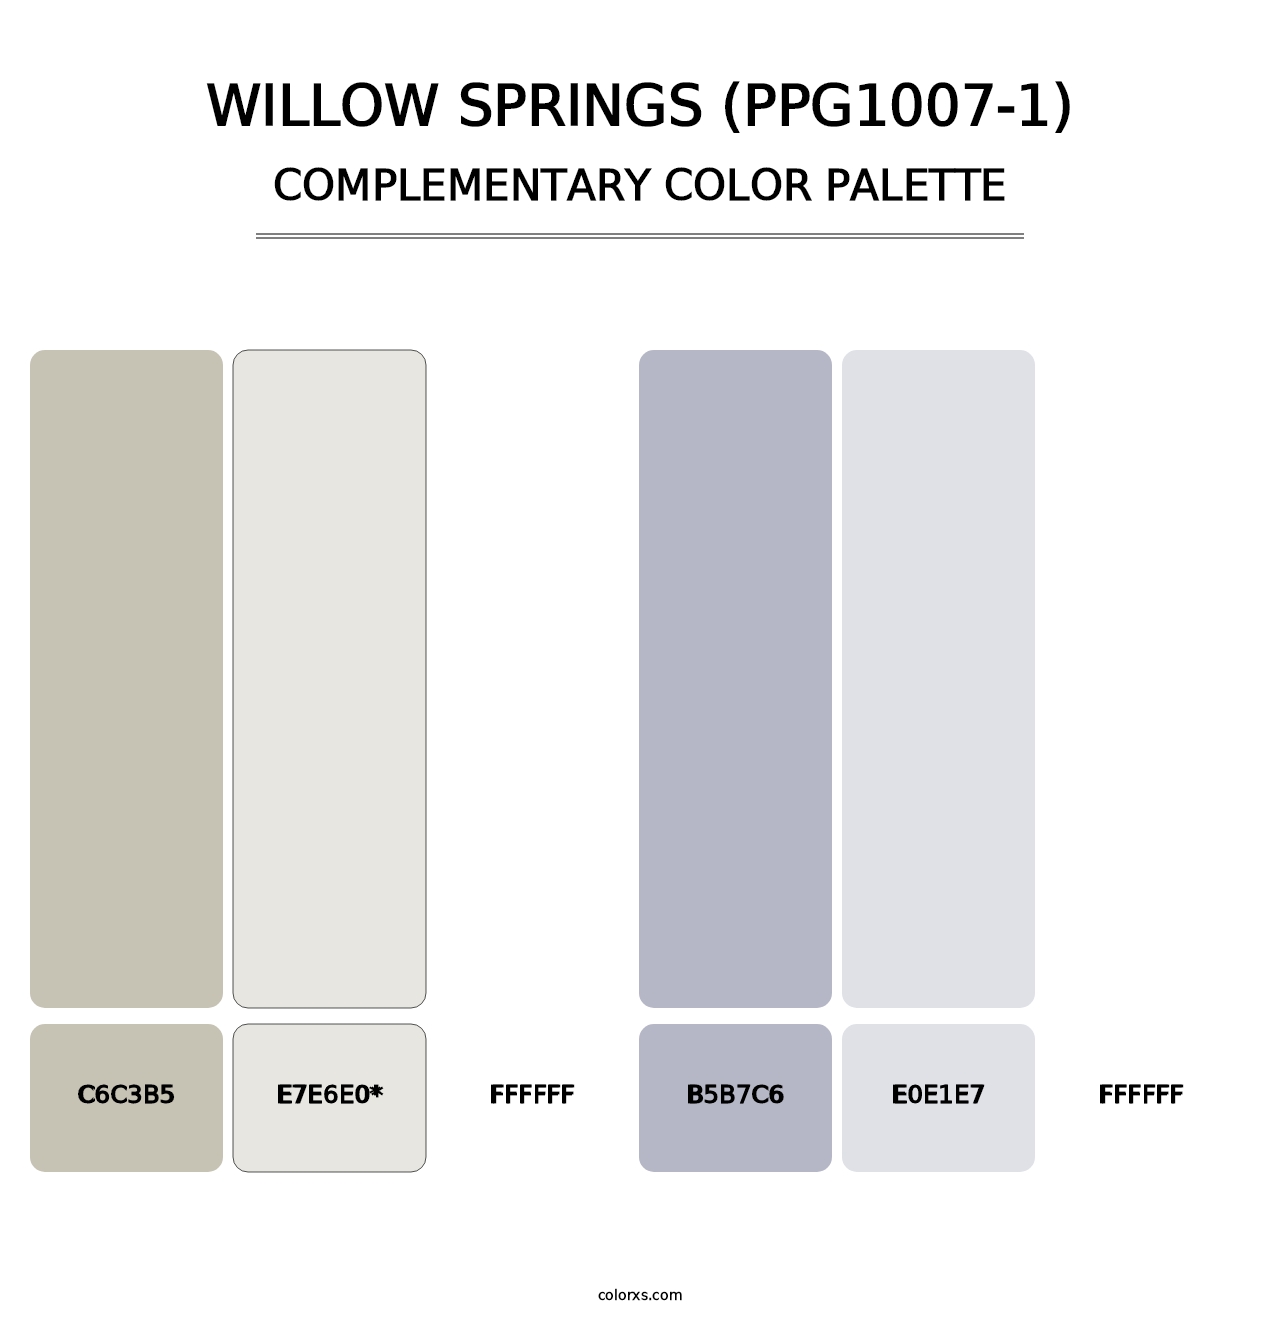 Willow Springs (PPG1007-1) - Complementary Color Palette